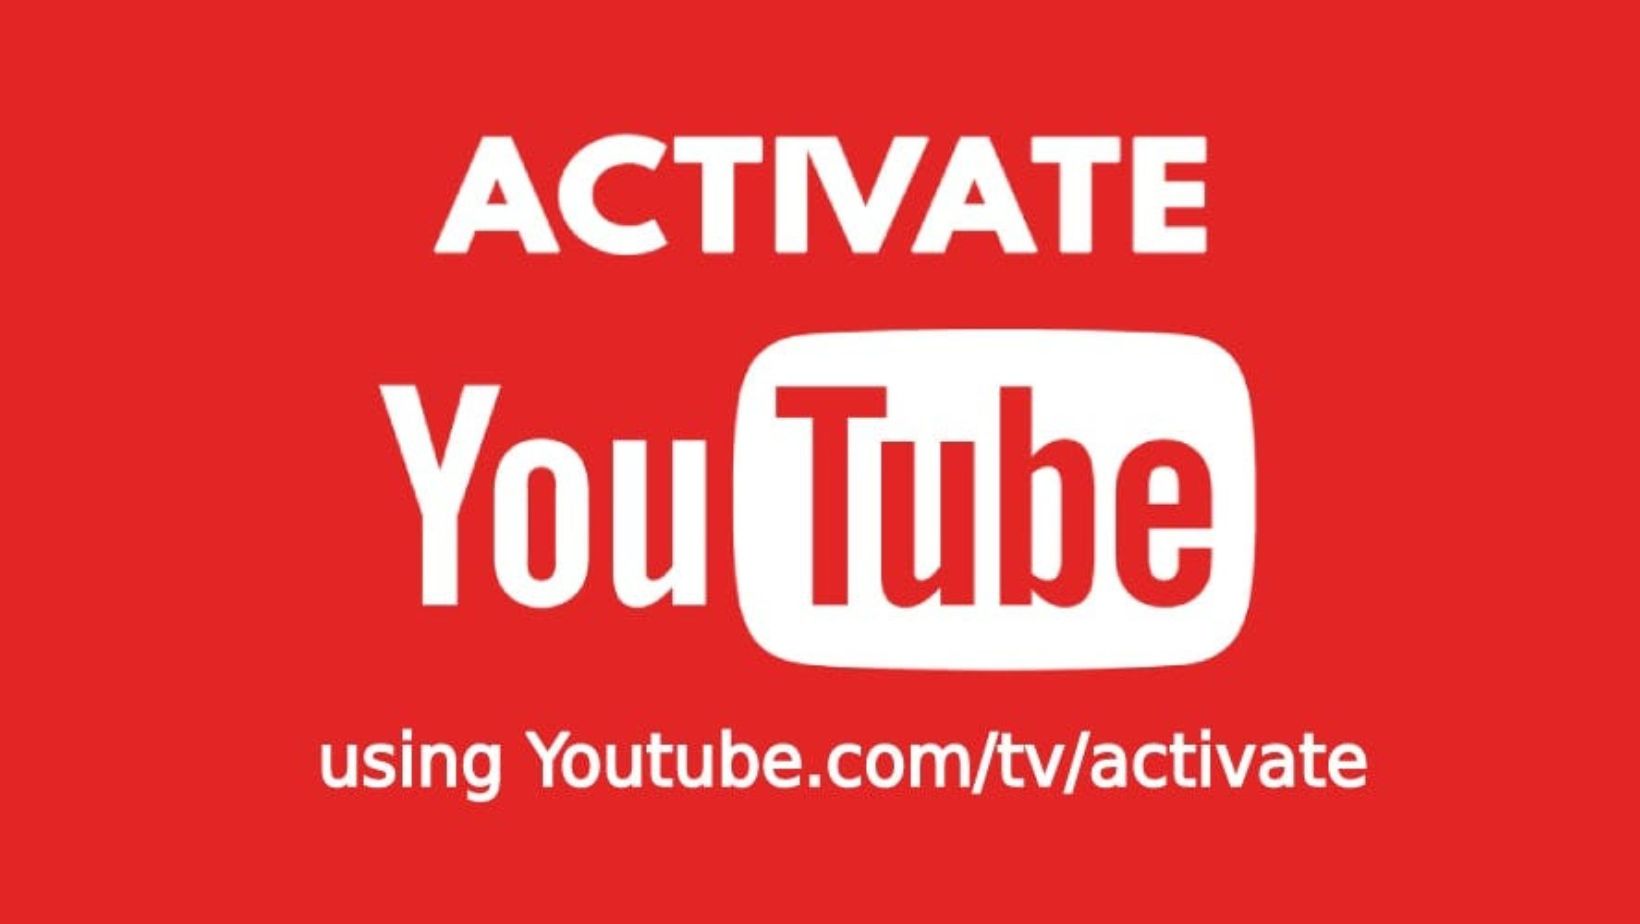 tv.youtube.com/start on your mobile device